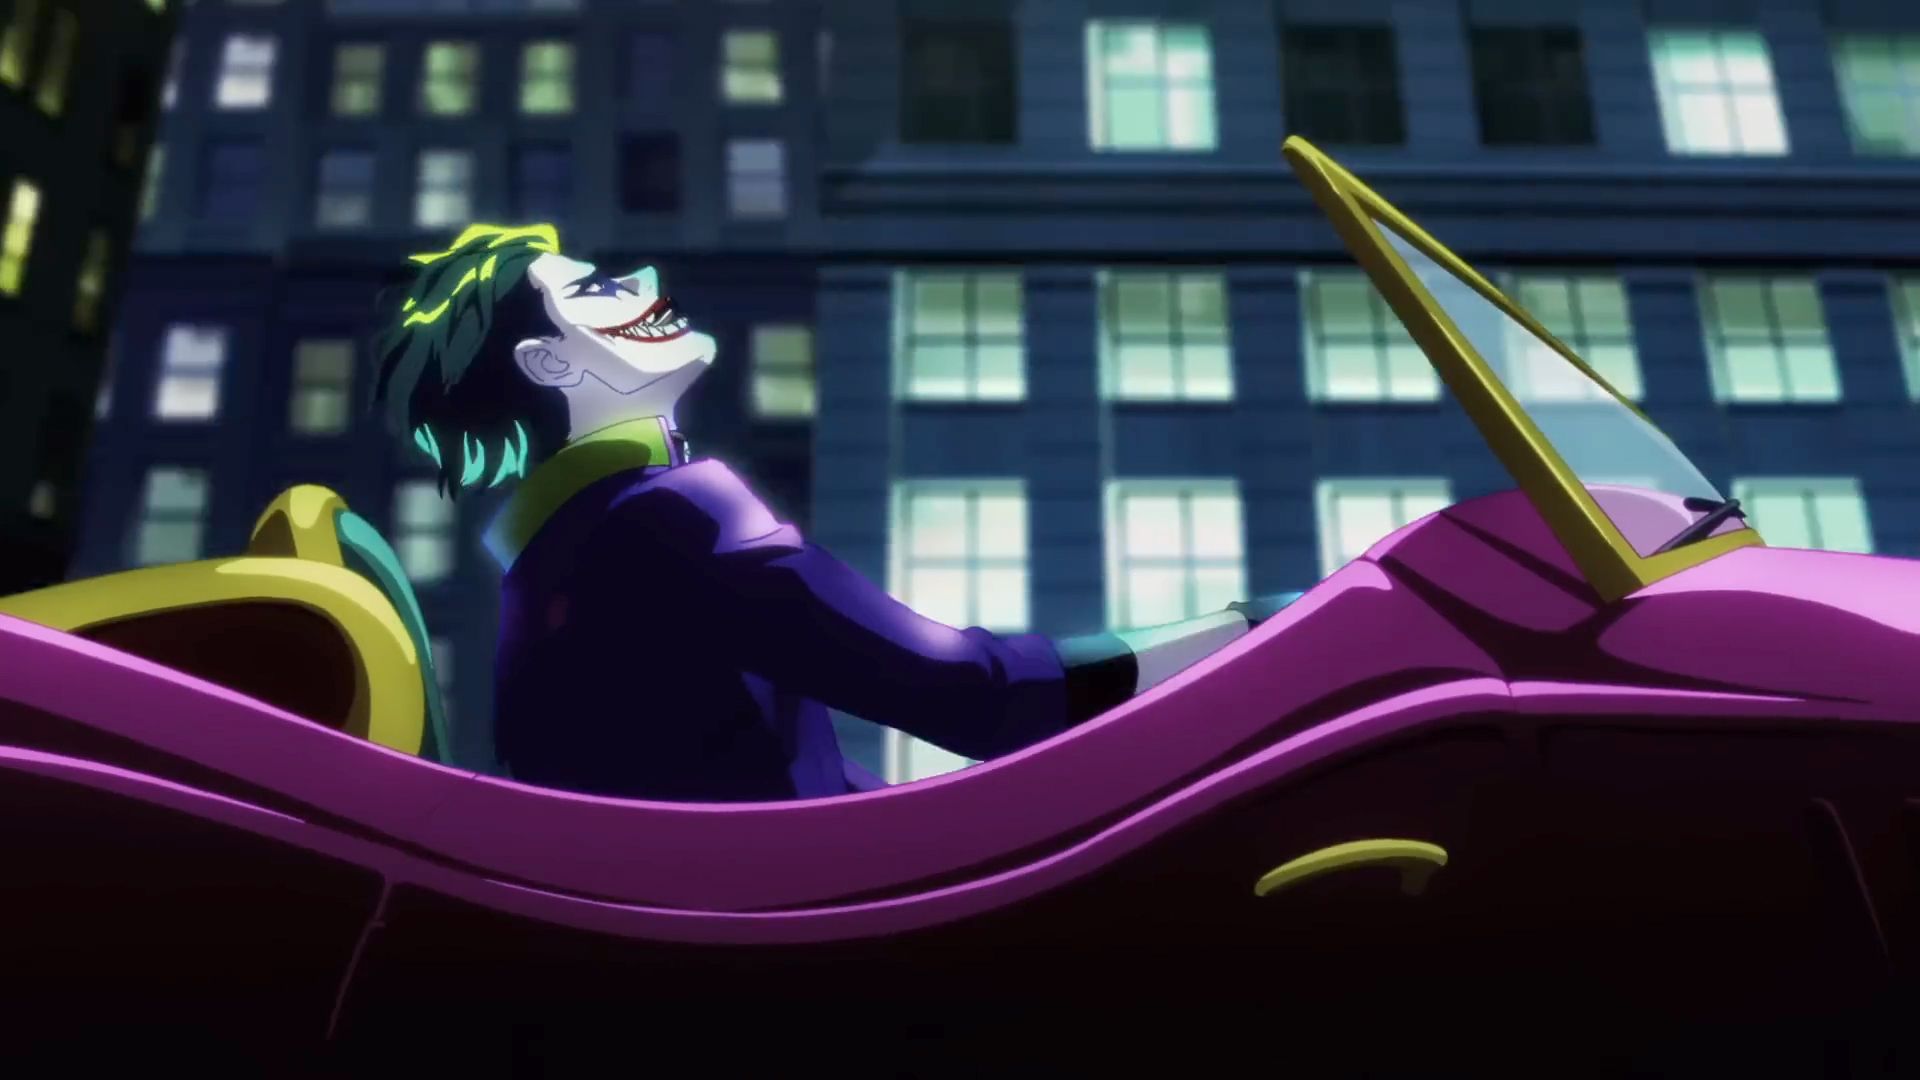 Bonkers New Trailer for the DC Anime Series SUICIDE SQUAD ISEKAI —  GeekTyrant